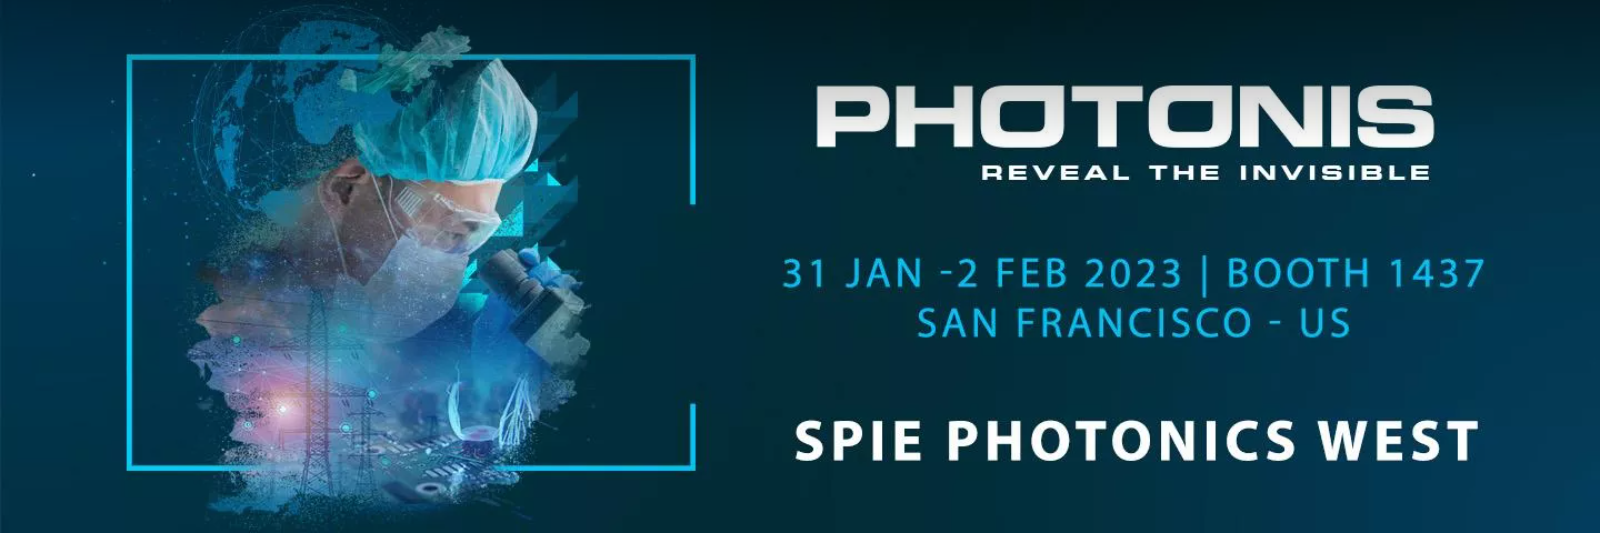 Experience our Fast, Single Photon Counting Technologies at SPIE Photonics WEST